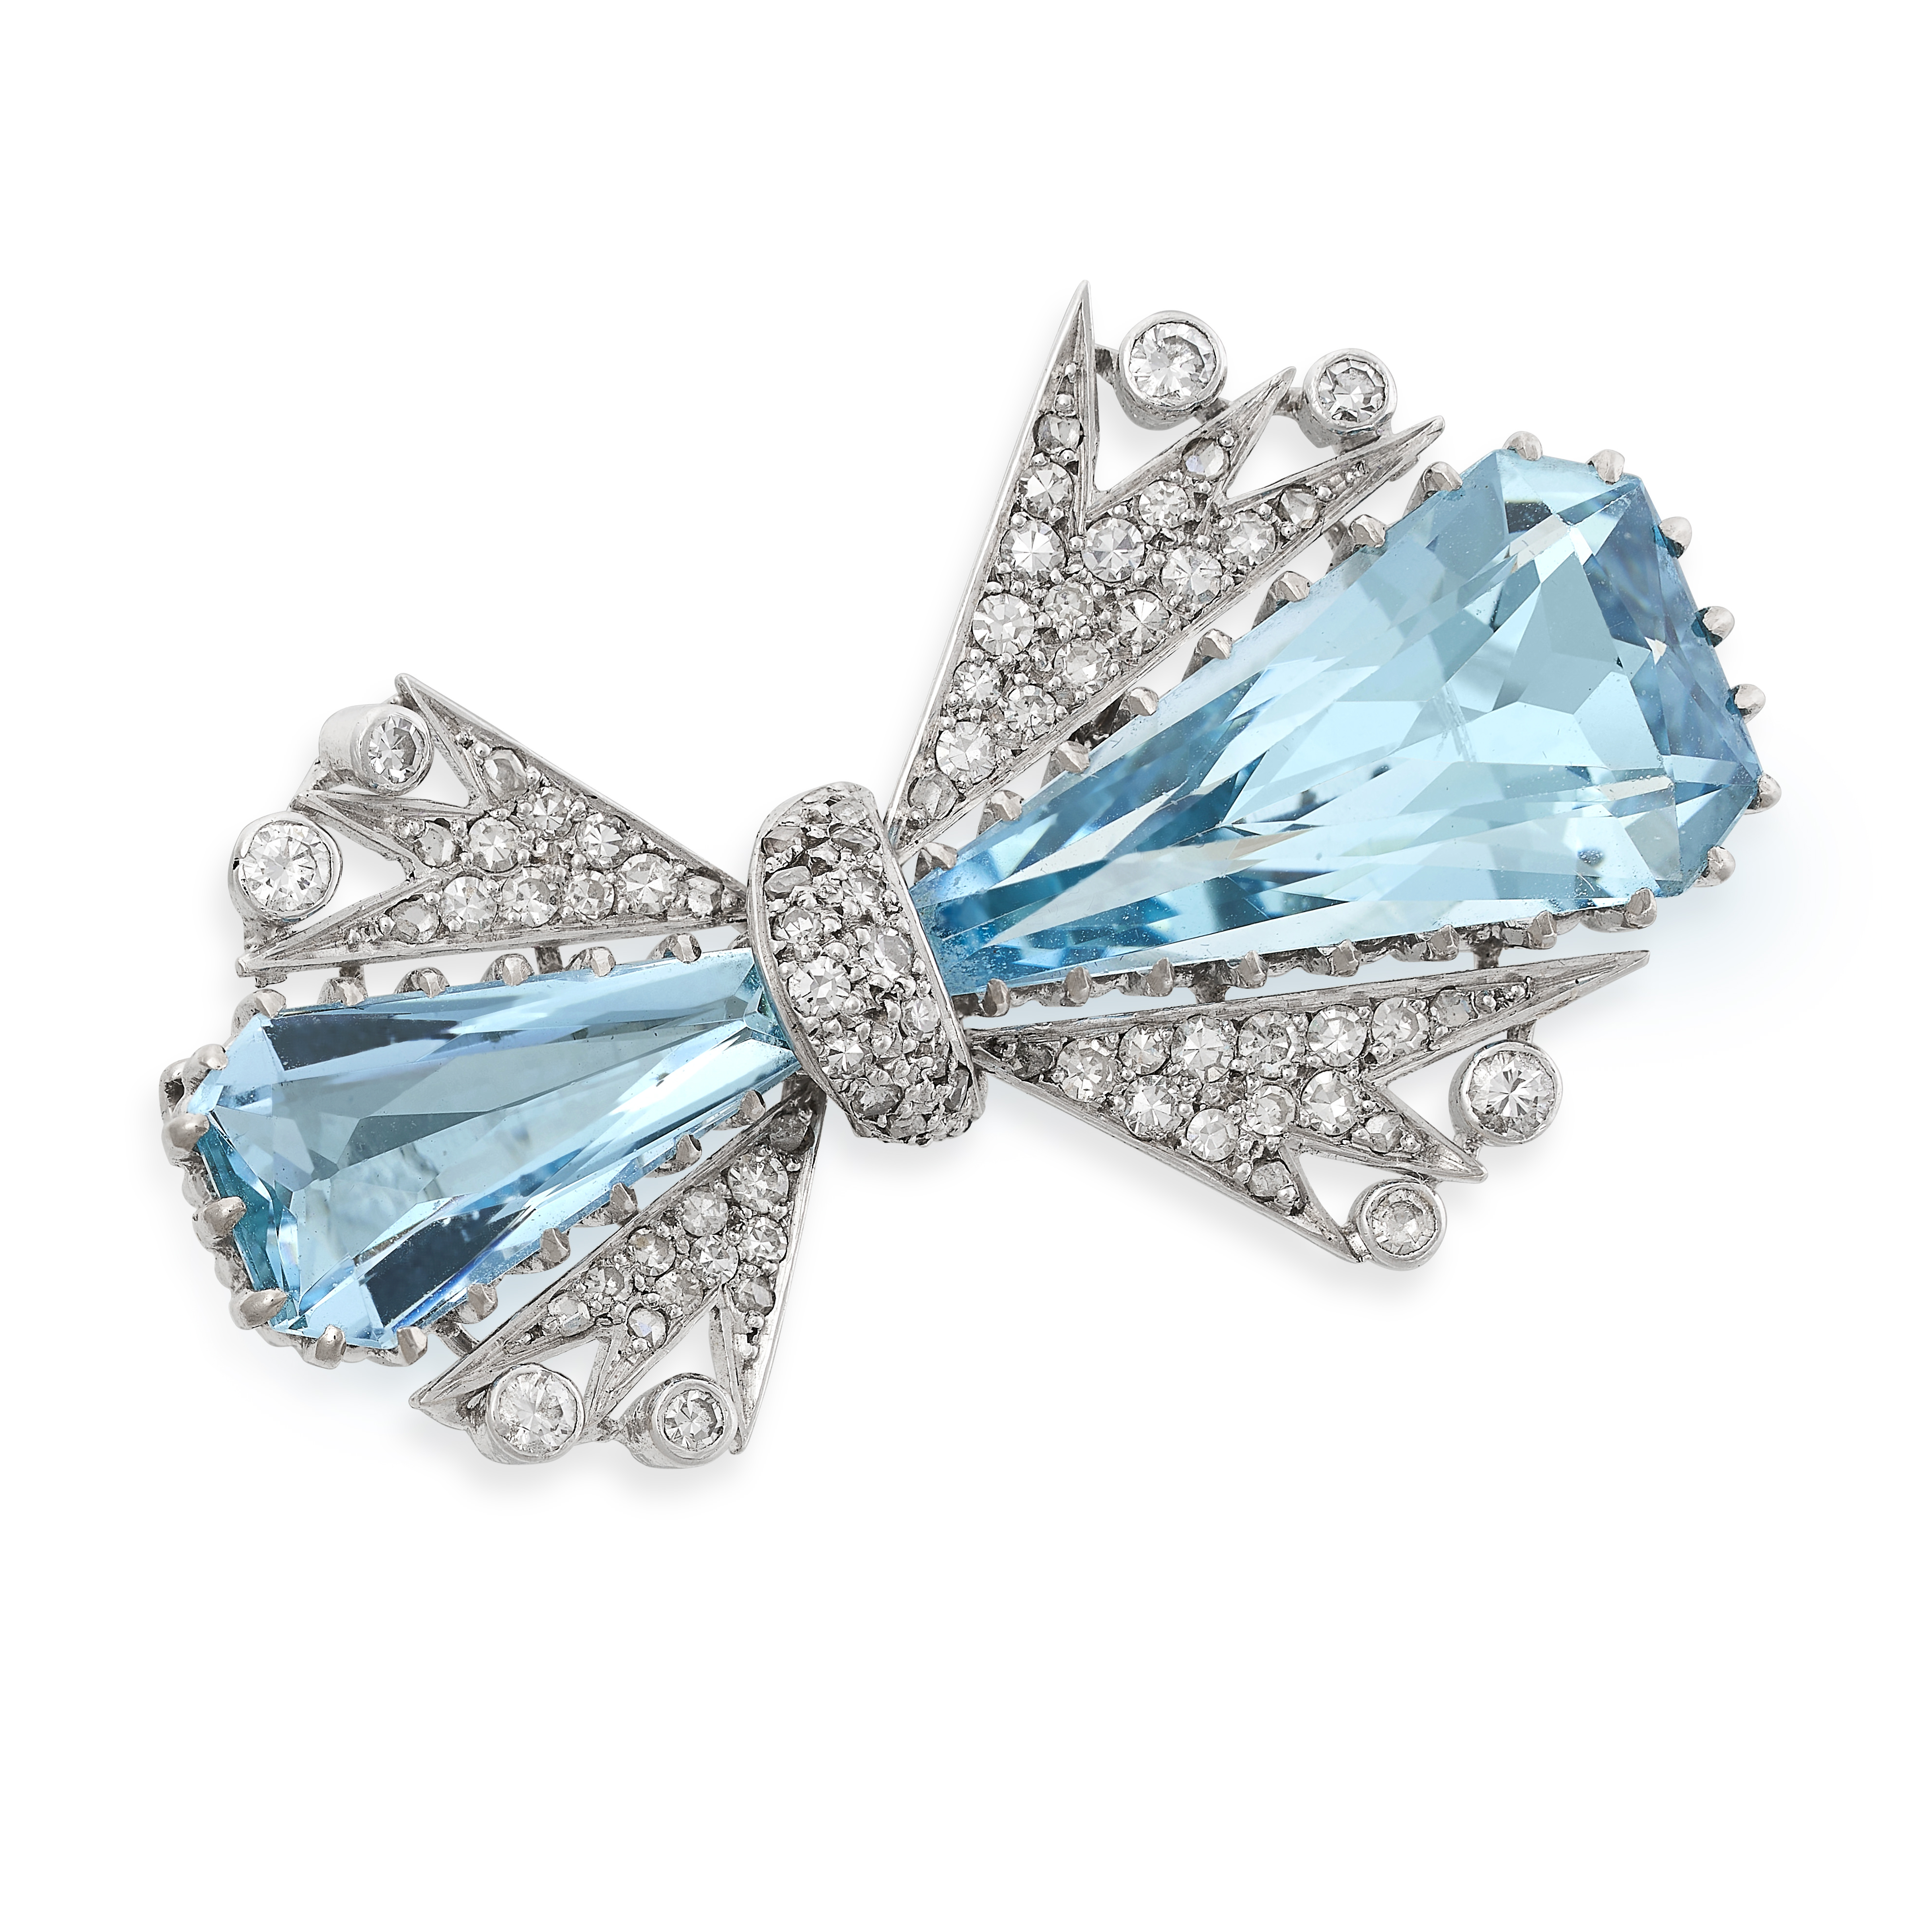 A VINTAGE AQUAMARINE AND DIAMOND BOW BROOCH, CIRCA 1950 in platinum and 18ct white gold, set with